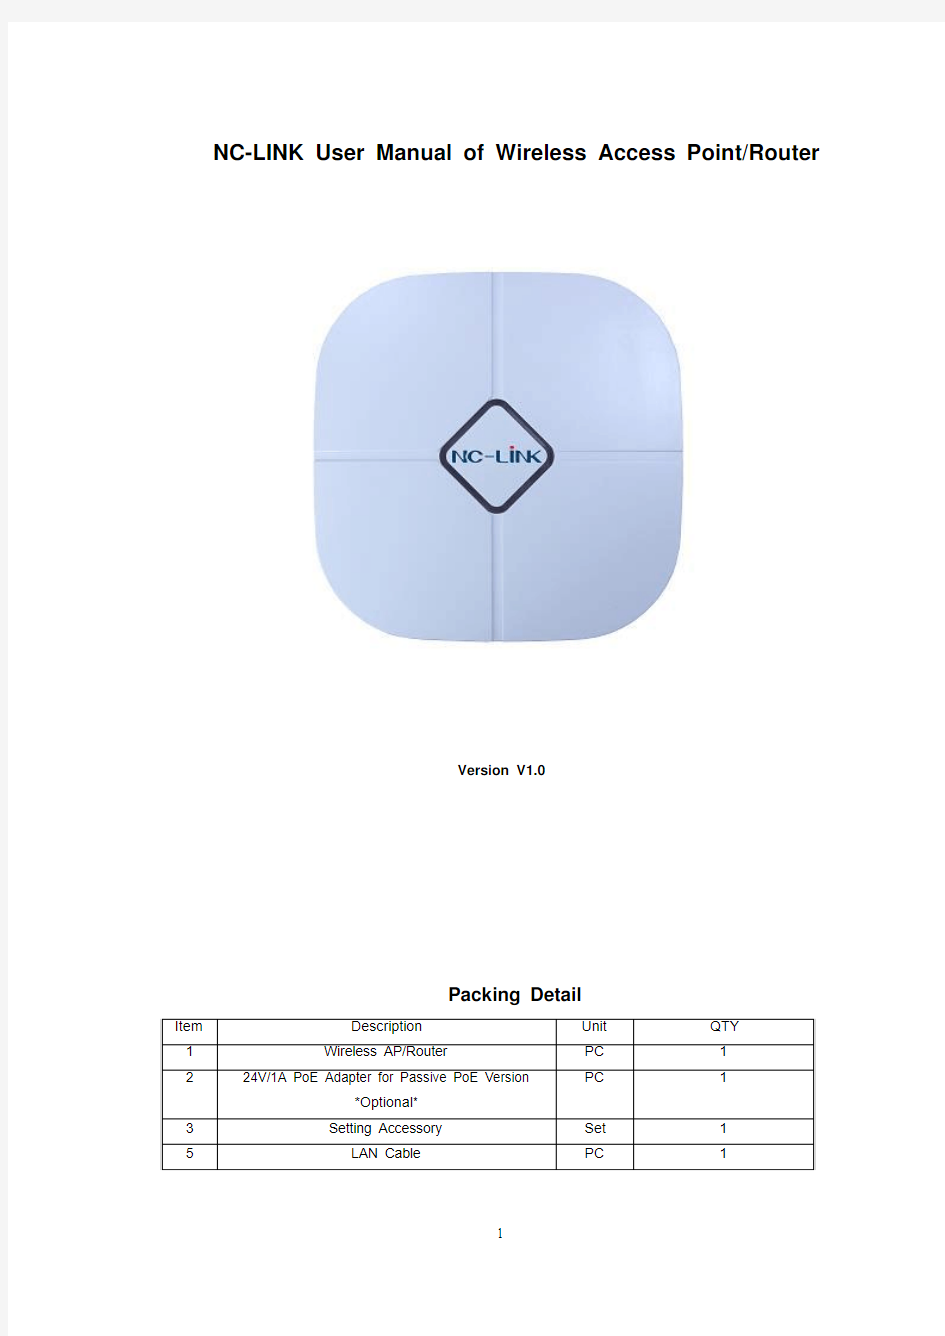 NC-LINK User Manual of Wireless Access Point and Router V1.0